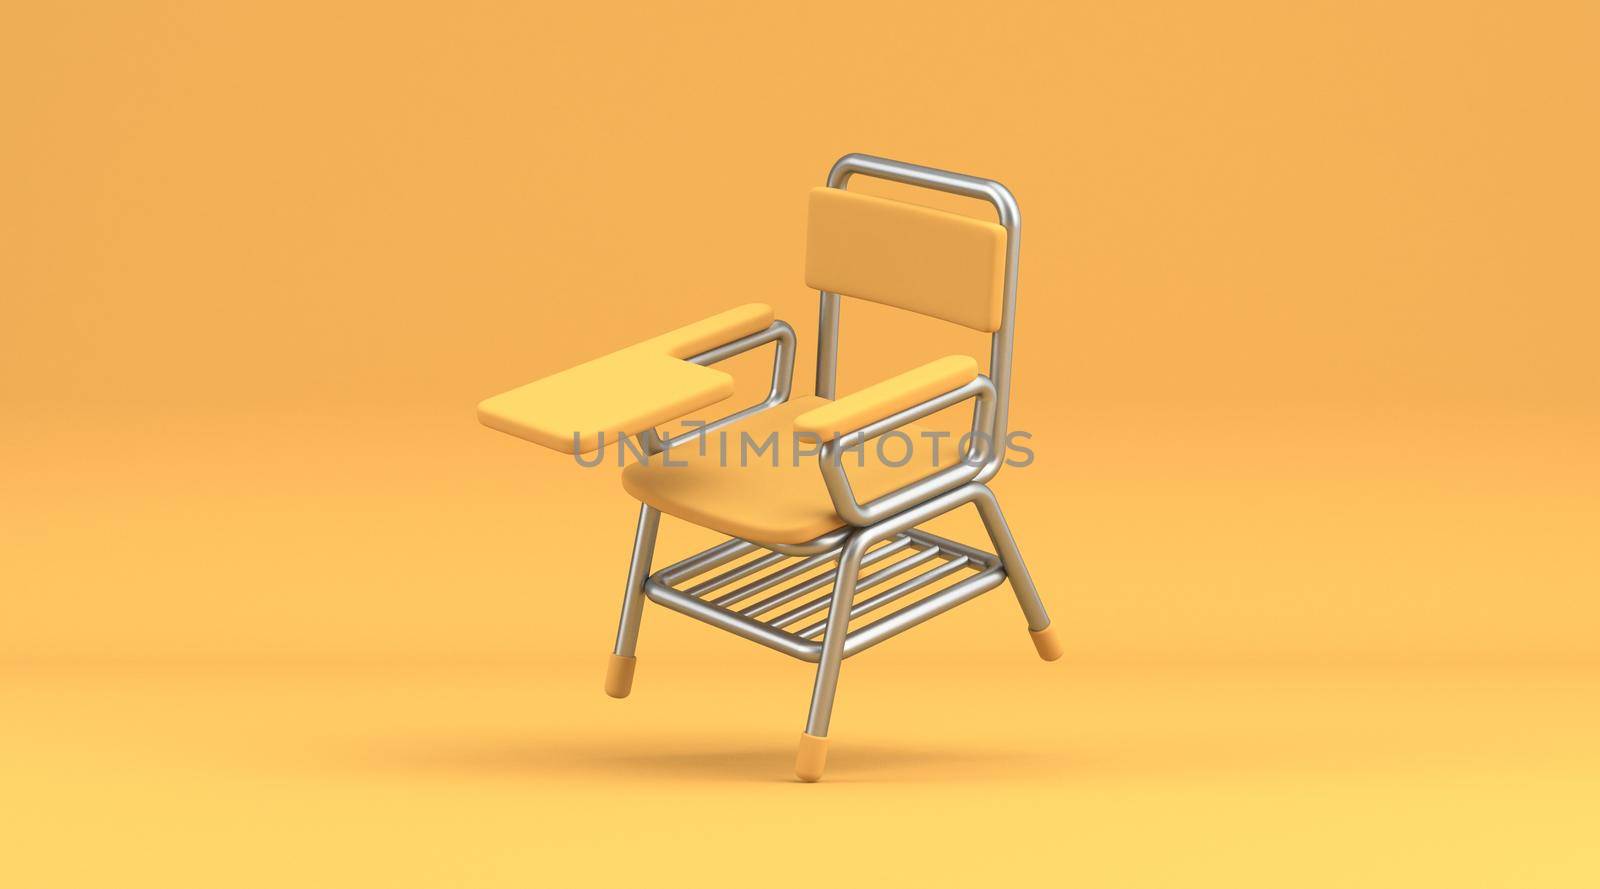 Writing pad student chair 3D rendering illustration isolated on yellow background